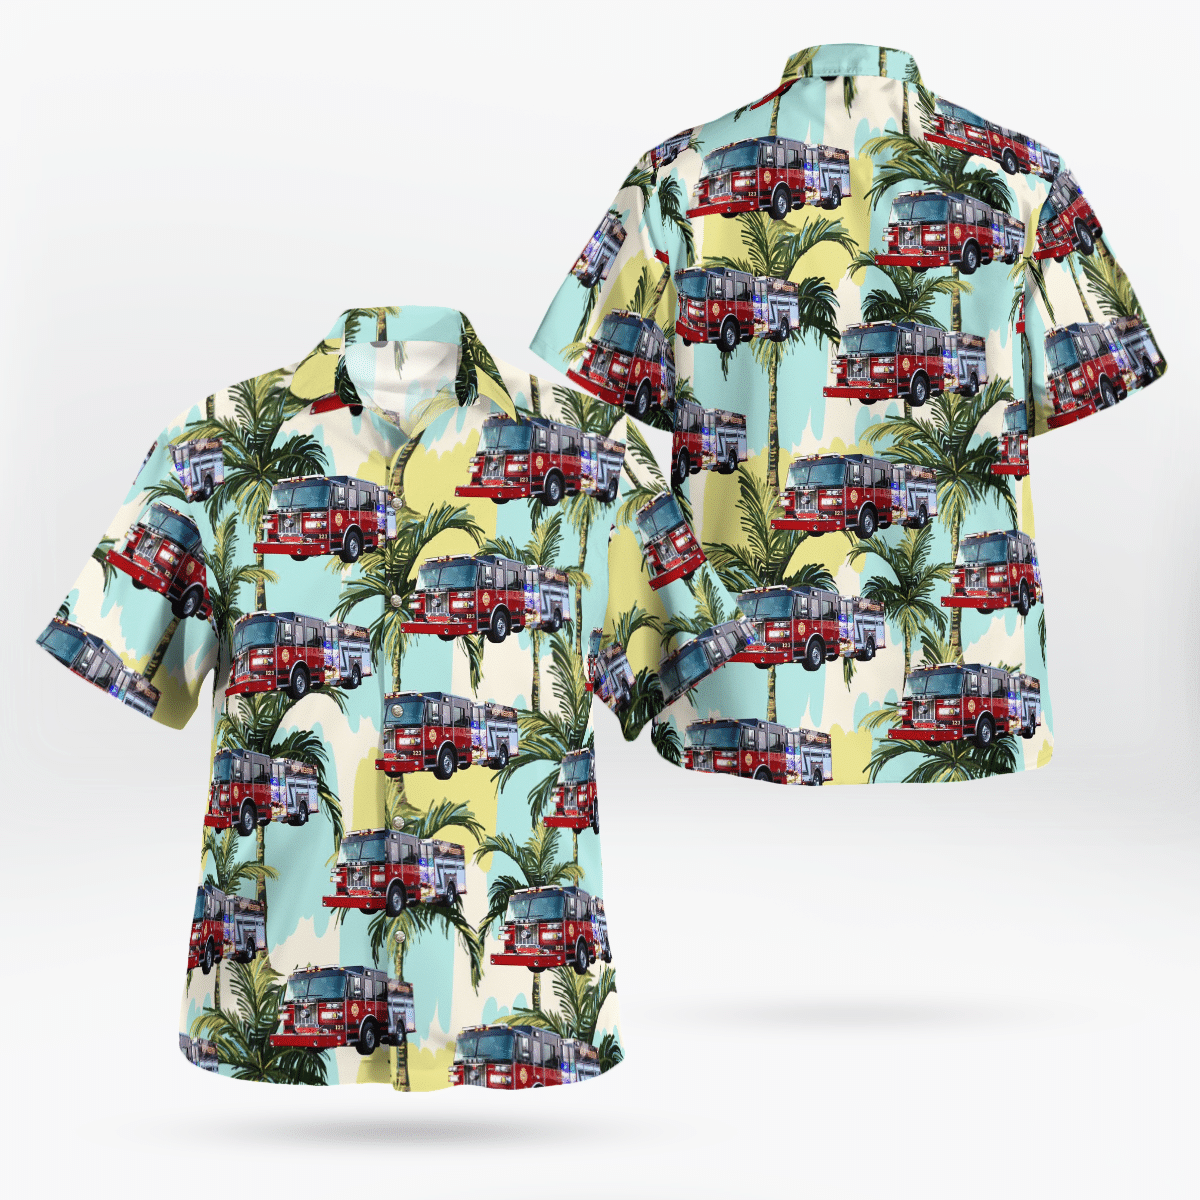 If you want to be noticed, wear These Trendy Hawaiian Shirt 86